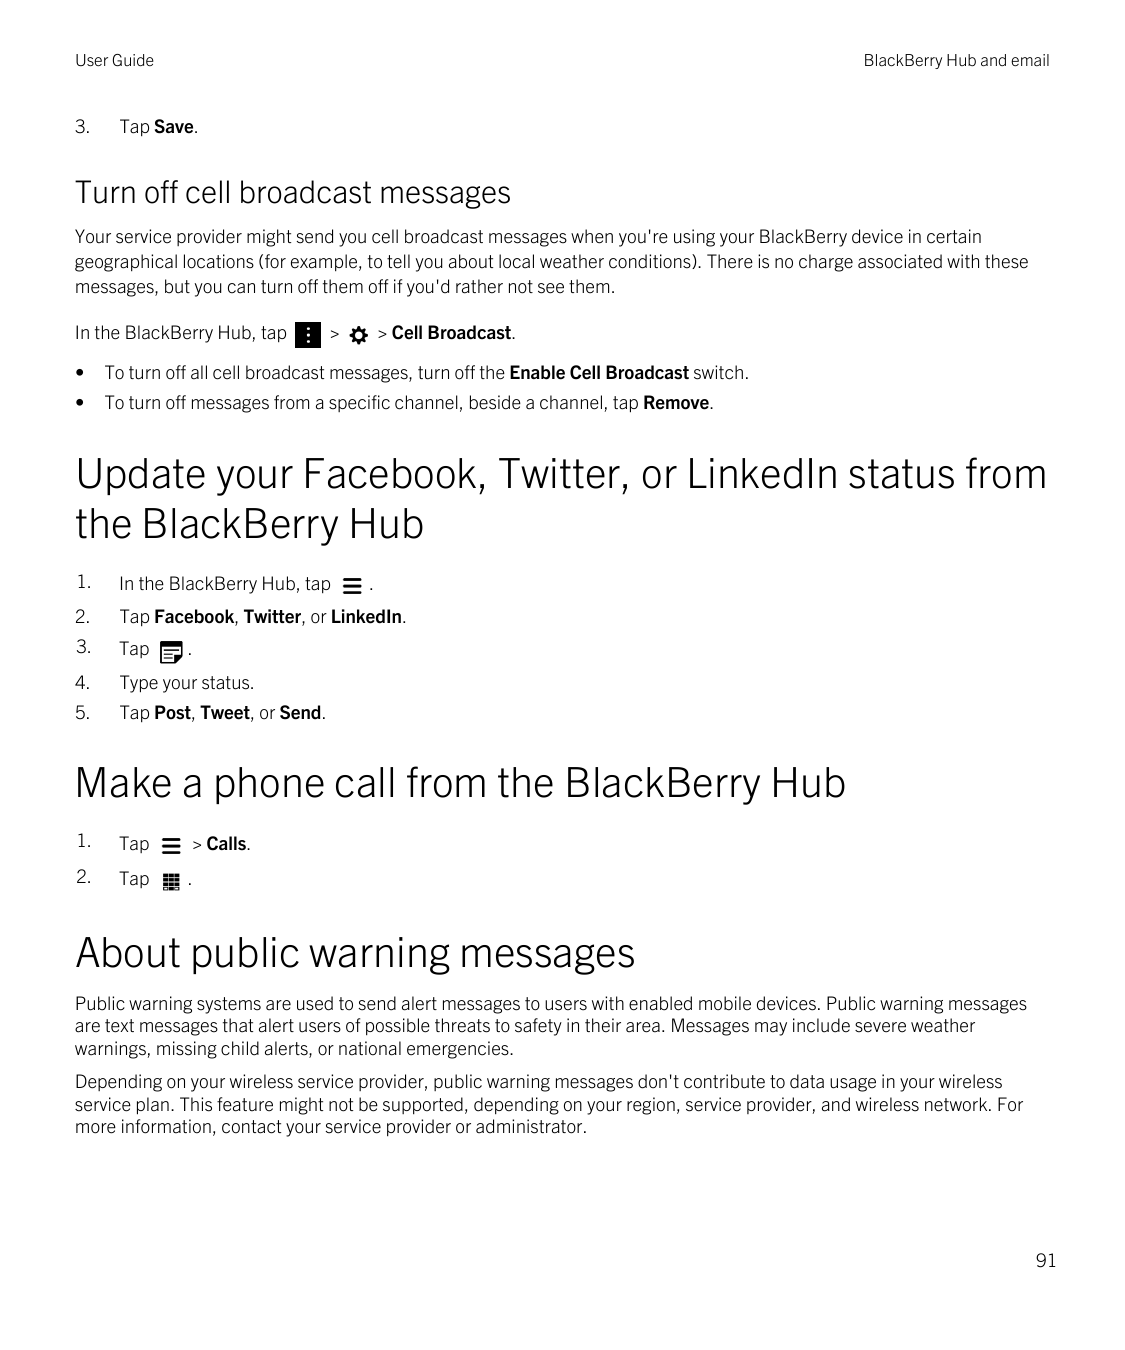 User Guide3.BlackBerry Hub and emailTap Save.Turn off cell broadcast messagesYour service provider might send you cell broadcast